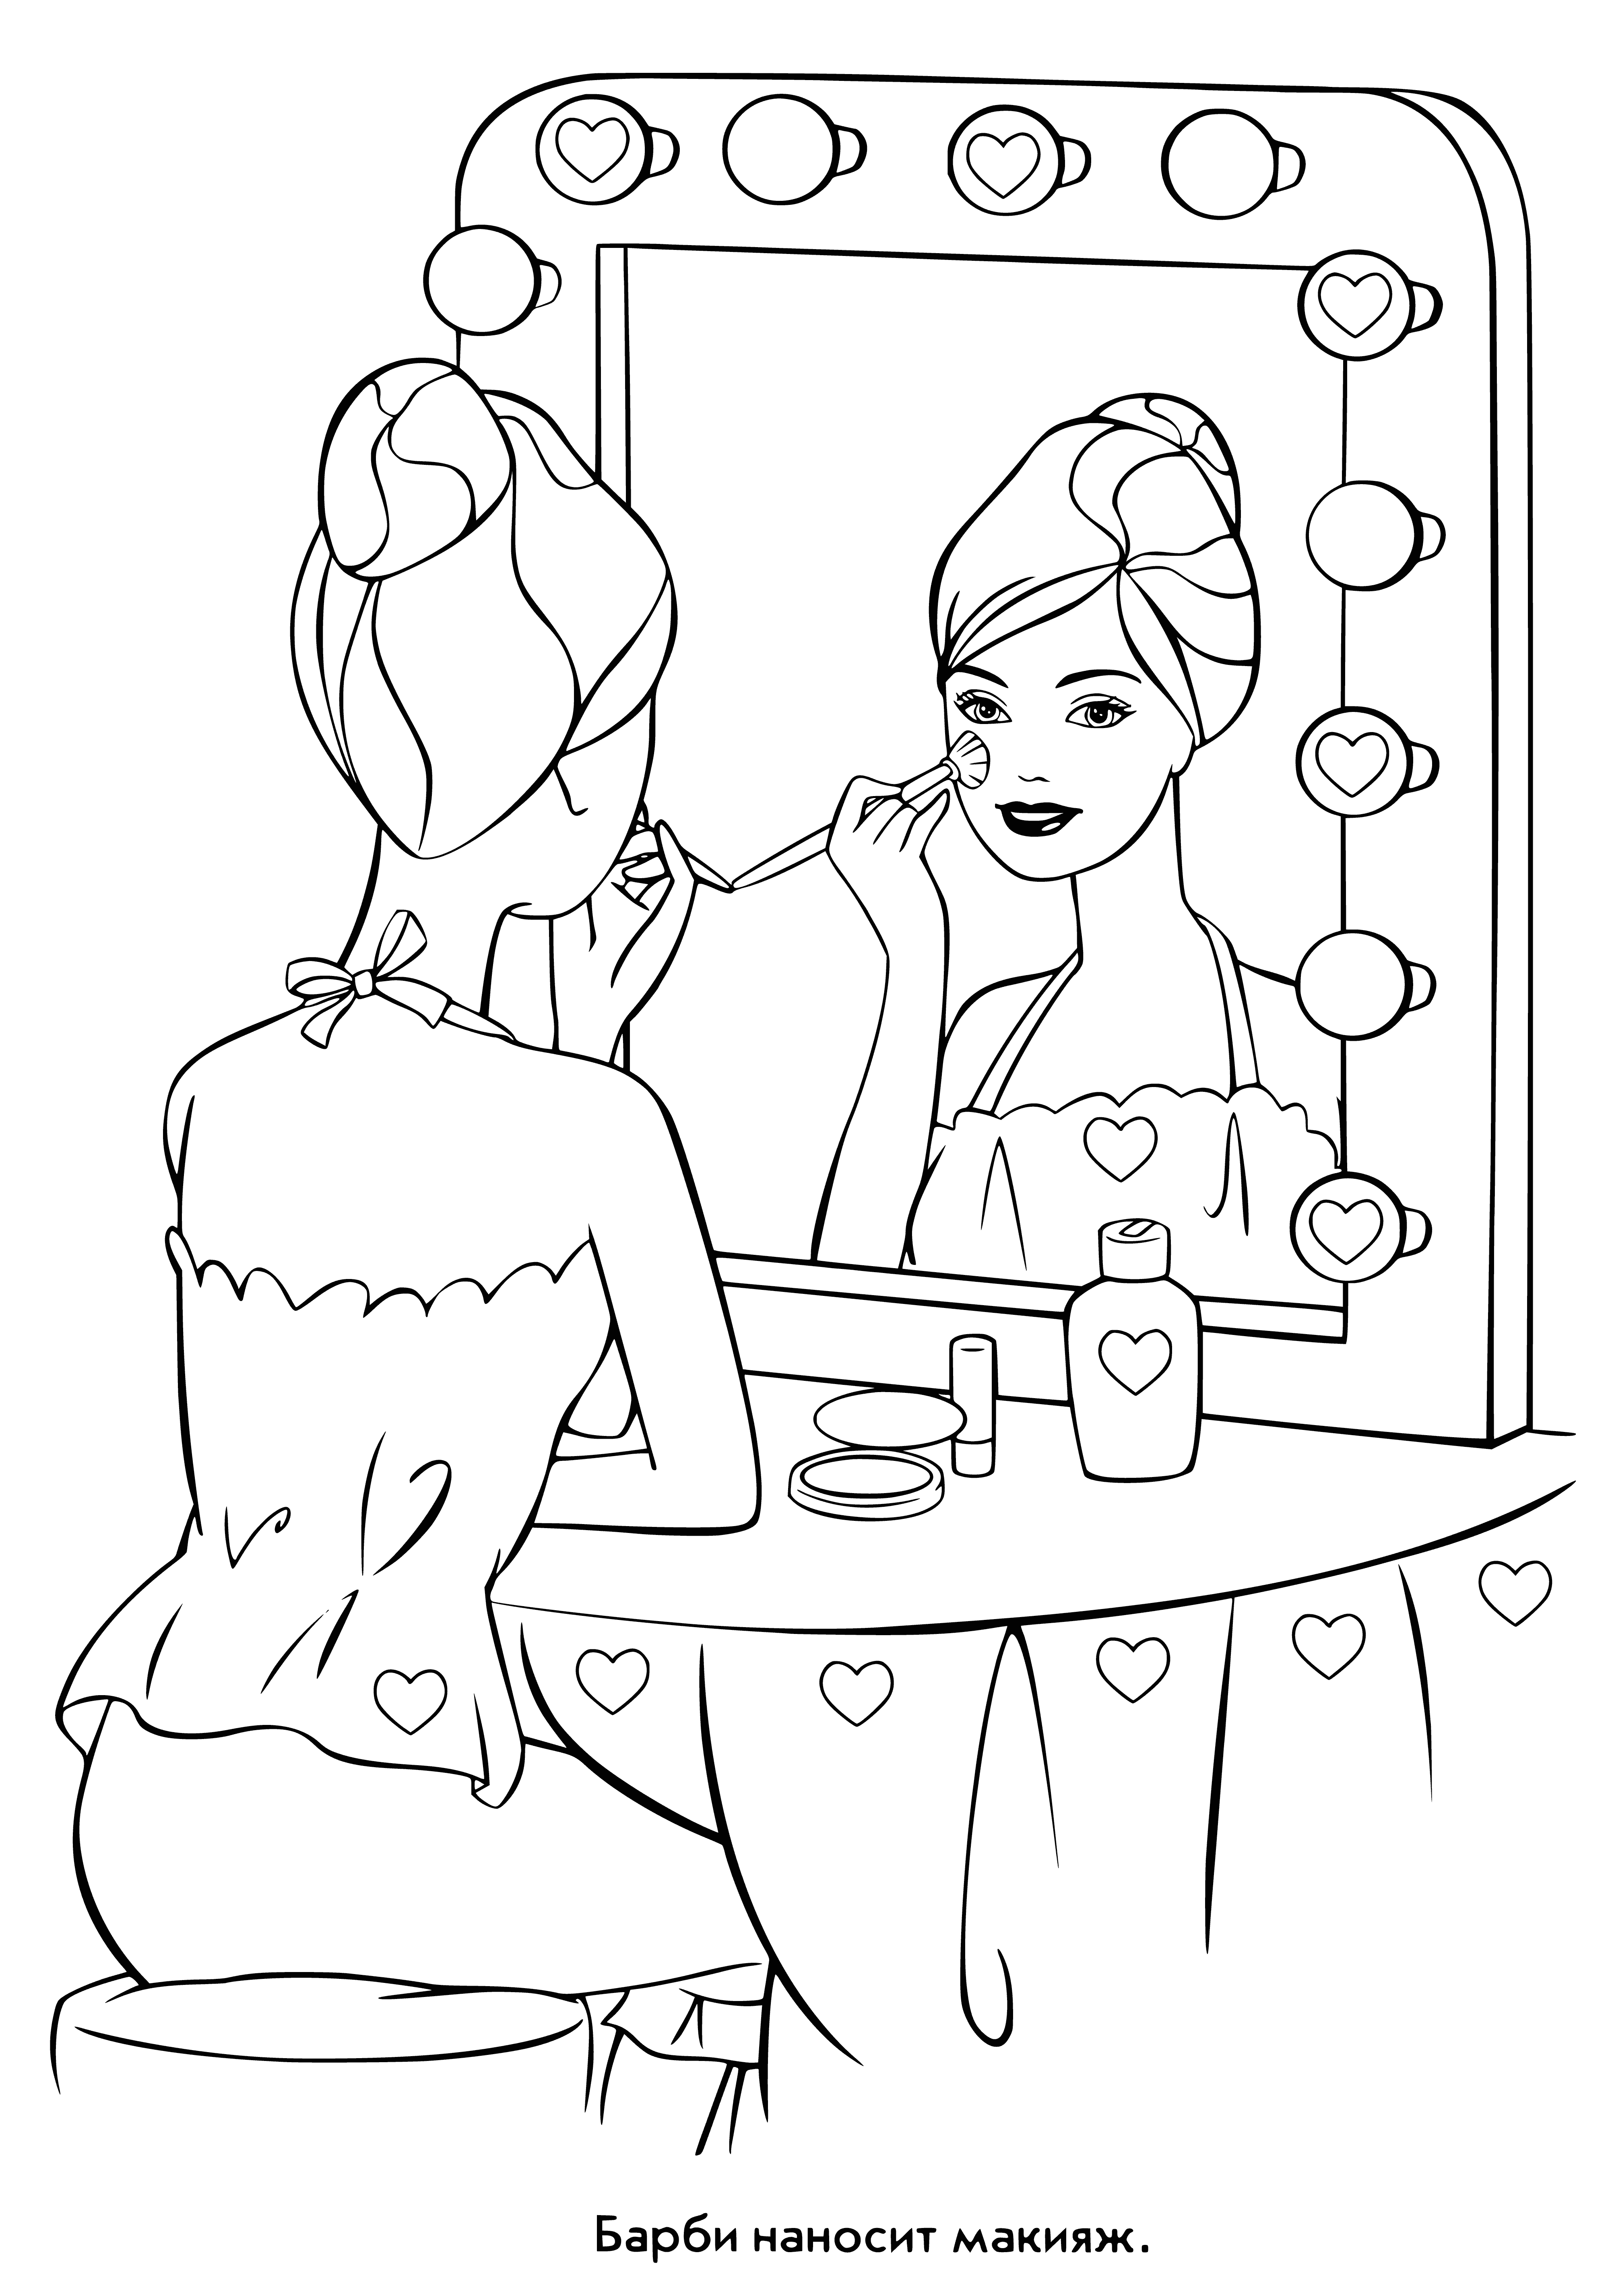 Barbie putting on makeup coloring page